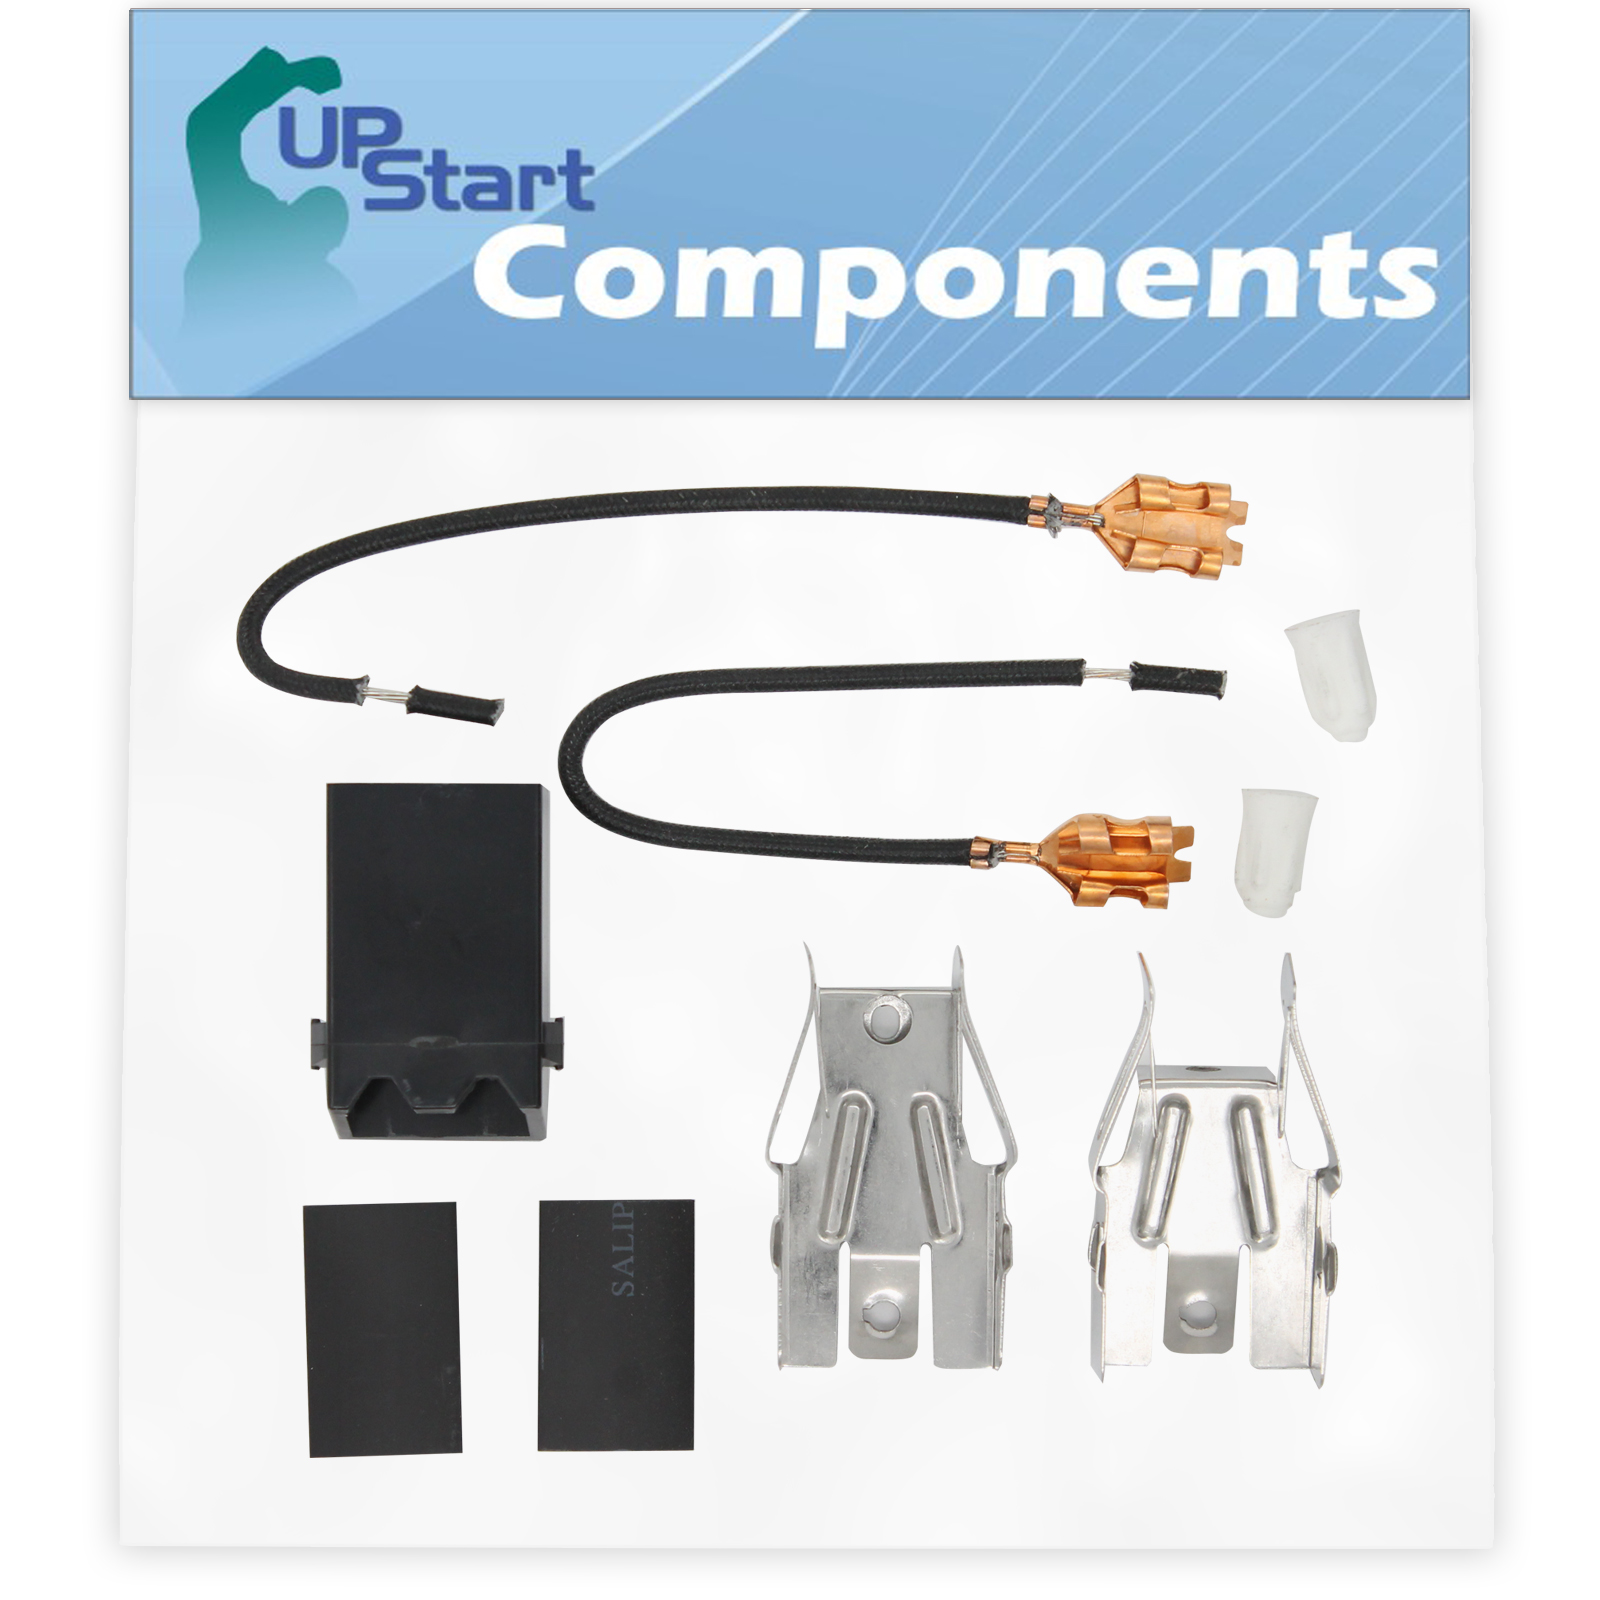 330031 Top Burner Receptacle Kit Replacement for Whirlpool F5808W0 Range/Cooktop/Oven - Compatible with 330031 Range Burner Receptacle Kit - UpStart Components Brand - image 1 of 4